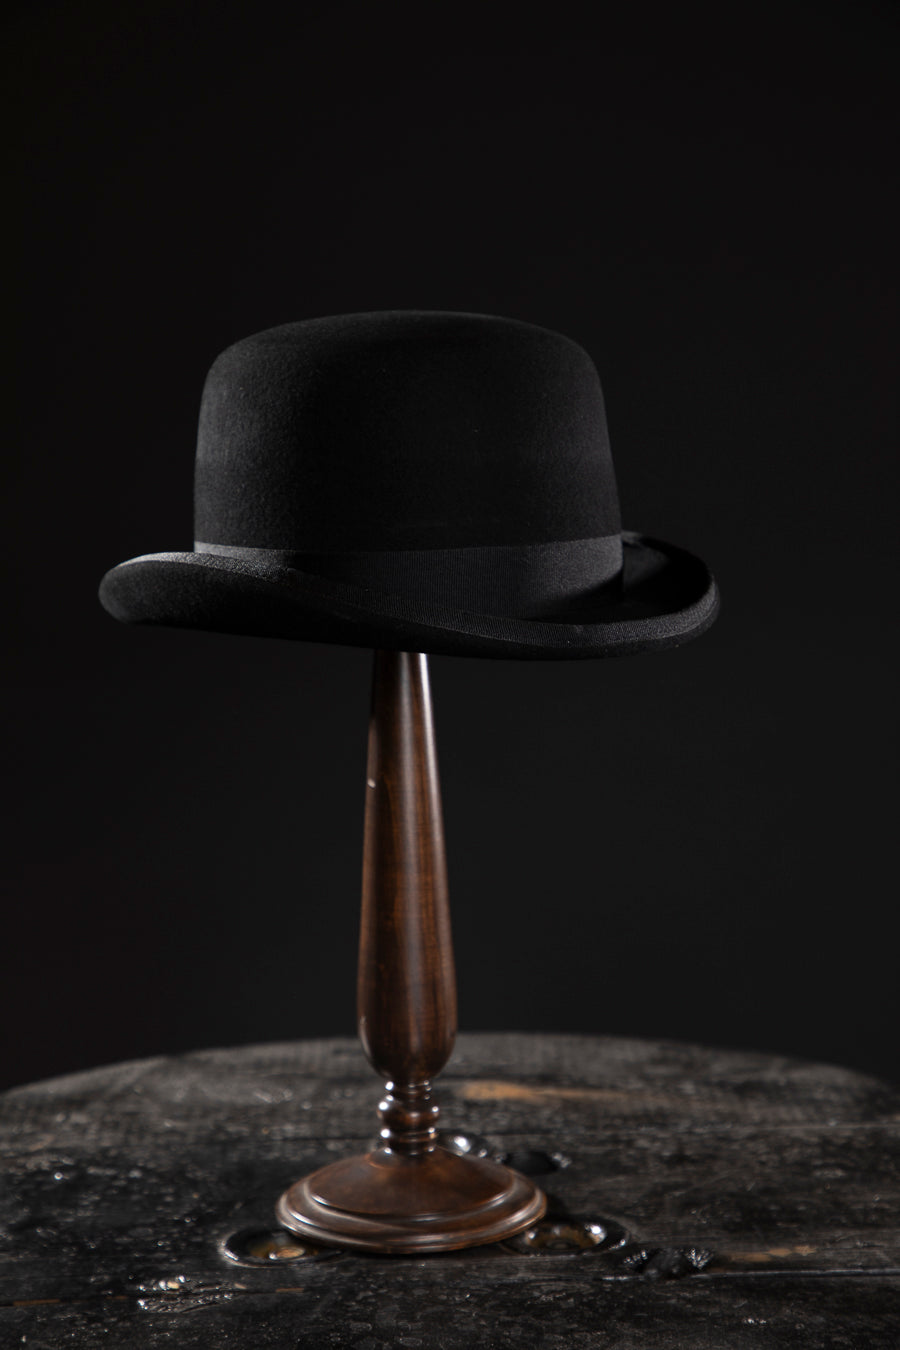 Wool Felt Bowler Hat - Deluxe, high quality hats for men and women. Our collection of hats including wool felt top hats, fedoras, bowlers, caps, fedoras, trilbys, cloches and more are a wonderful addition to a 1920s Gangster or Gatsby costume, or the perfect fashion accessory. Shop online, or visit our Mornington hat store to see all that we have to offer.